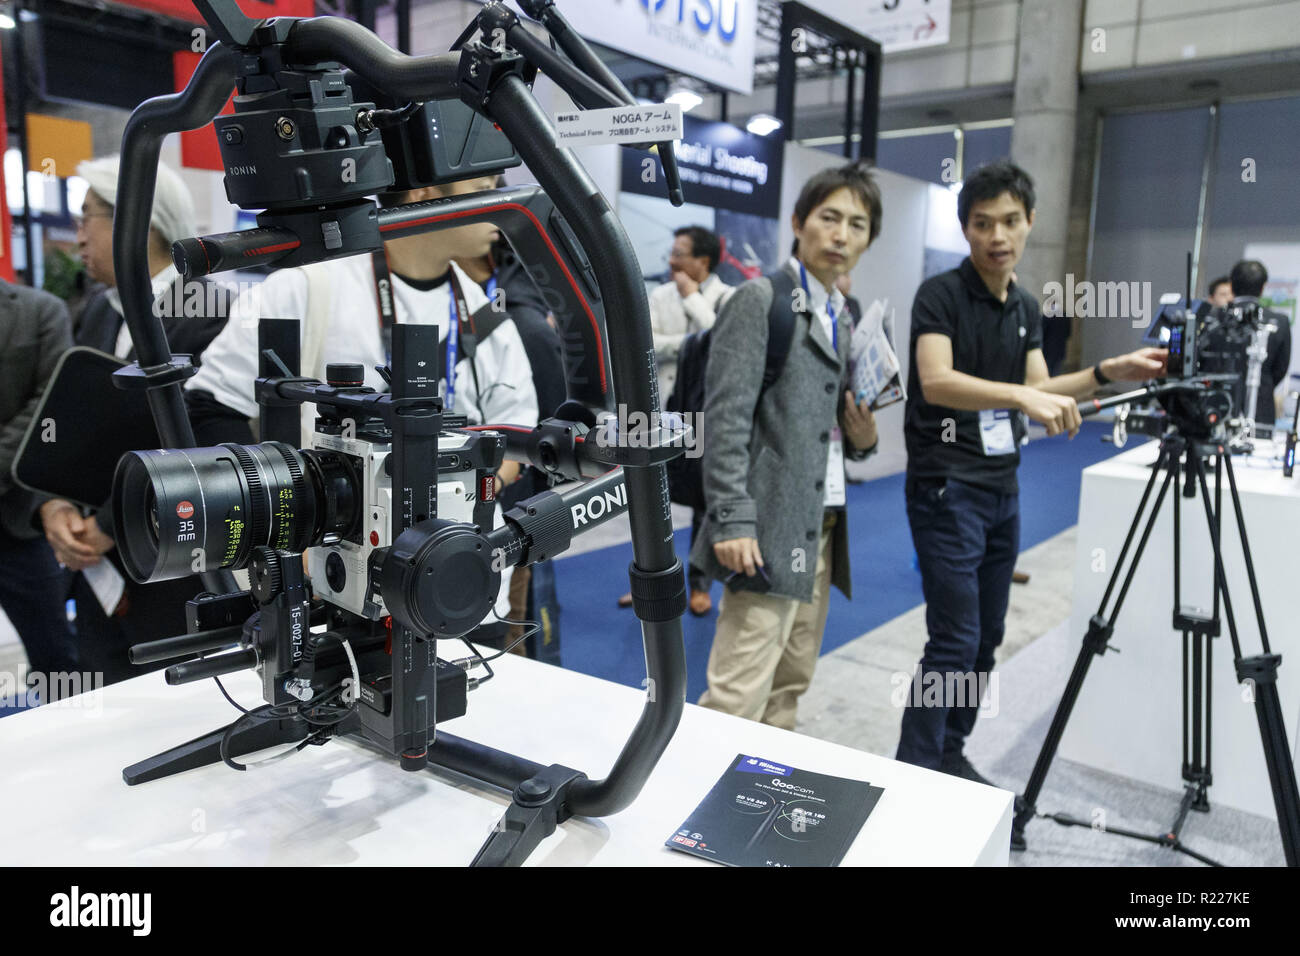 Chiba, Japan. 15th Nov, 2018. An exhibitor operates from the distance a steadicam RONIN 2 during the International Broadcast Equipment Exhibition (Inter BEE) 2018 at the International Convention Complex Makuhari Messe in Chiba. The exhibition shows the latest technologies from Japan and overseas in audio, video and communications including 16K displays and new camera equipment. Inter BEE is held from November 14 to 16. Credit: Rodrigo Reyes Marin/ZUMA Wire/Alamy Live News Stock Photo